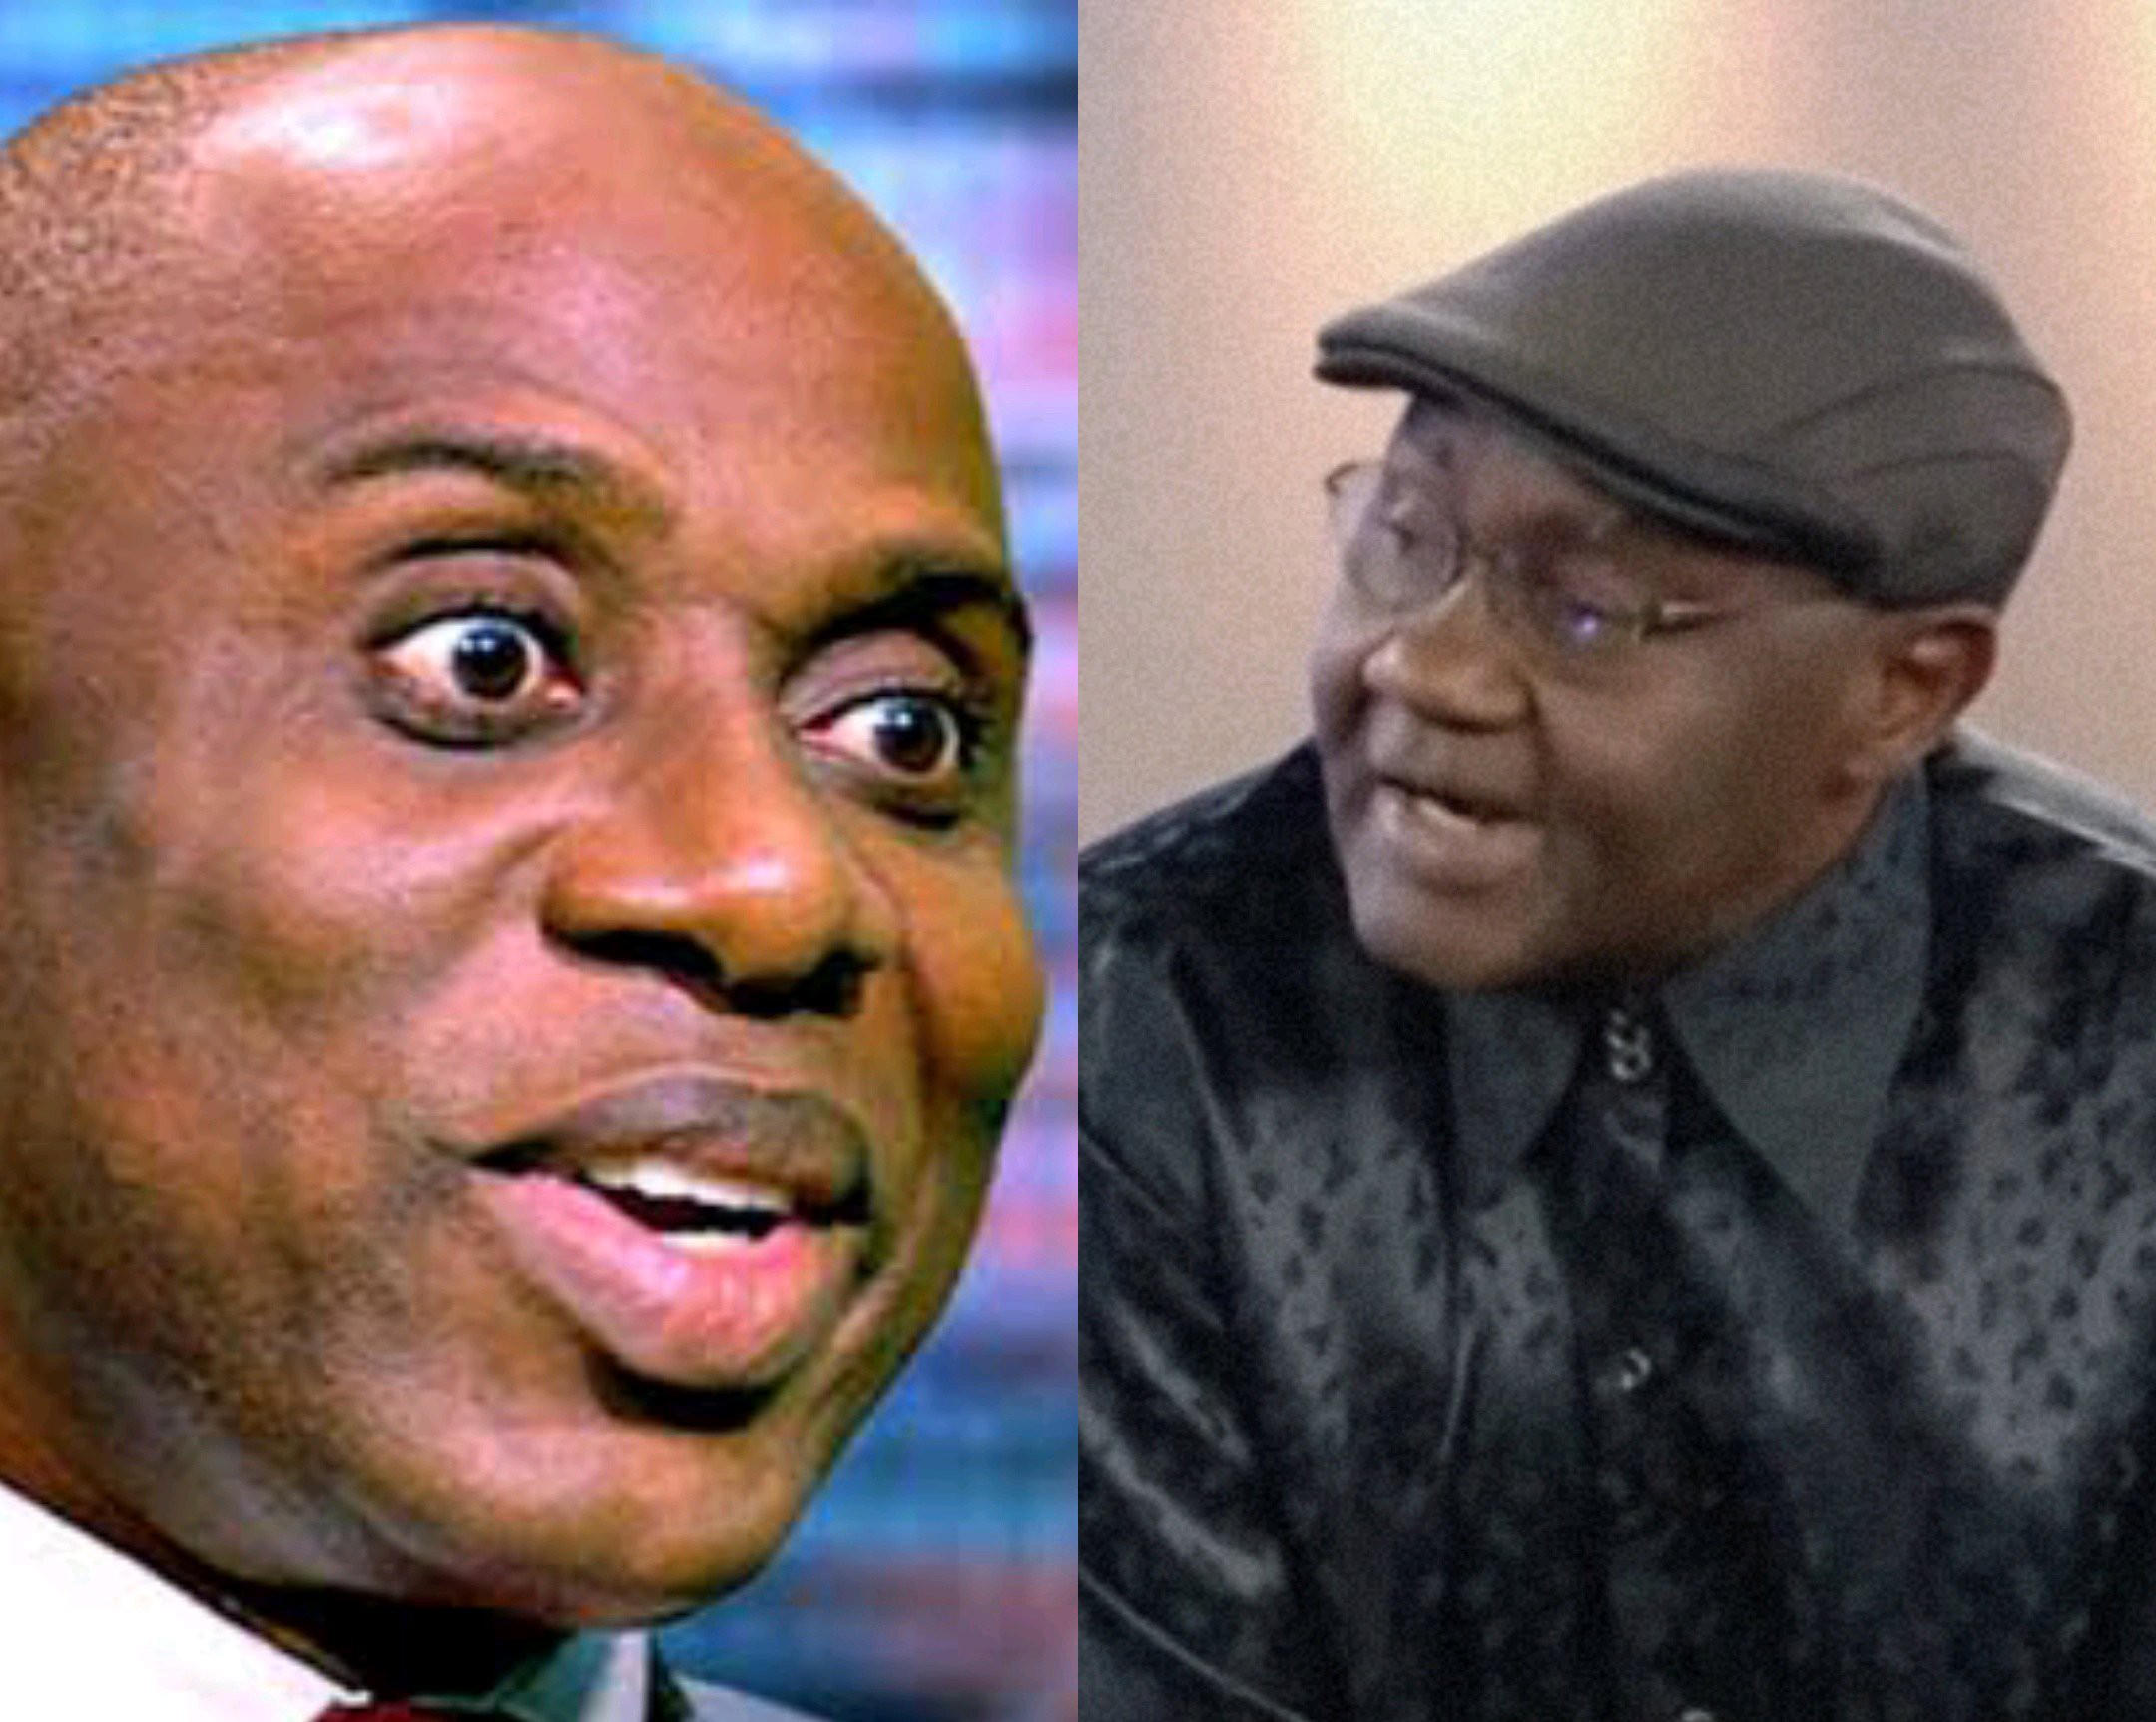 I Don't Know Of Anything Being Done To Rotimi Amaechi By APC For Me To Talk About It Publicly - According to Magnus Abe